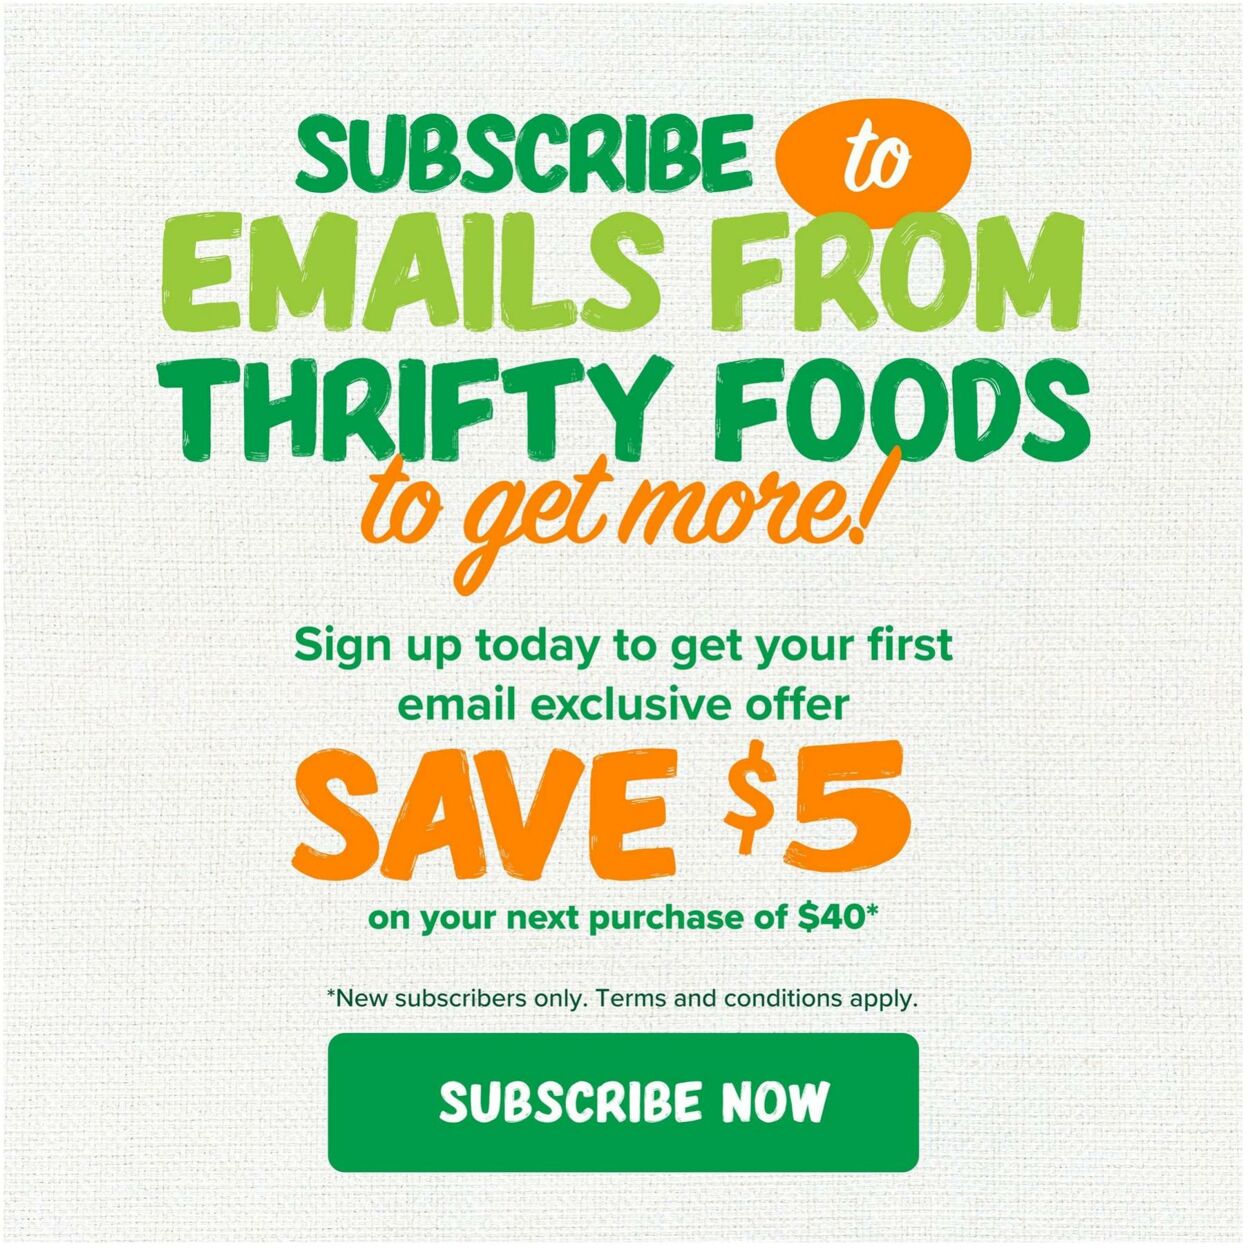 Circulaire Thrifty Foods 22.12.2022 - 28.12.2022